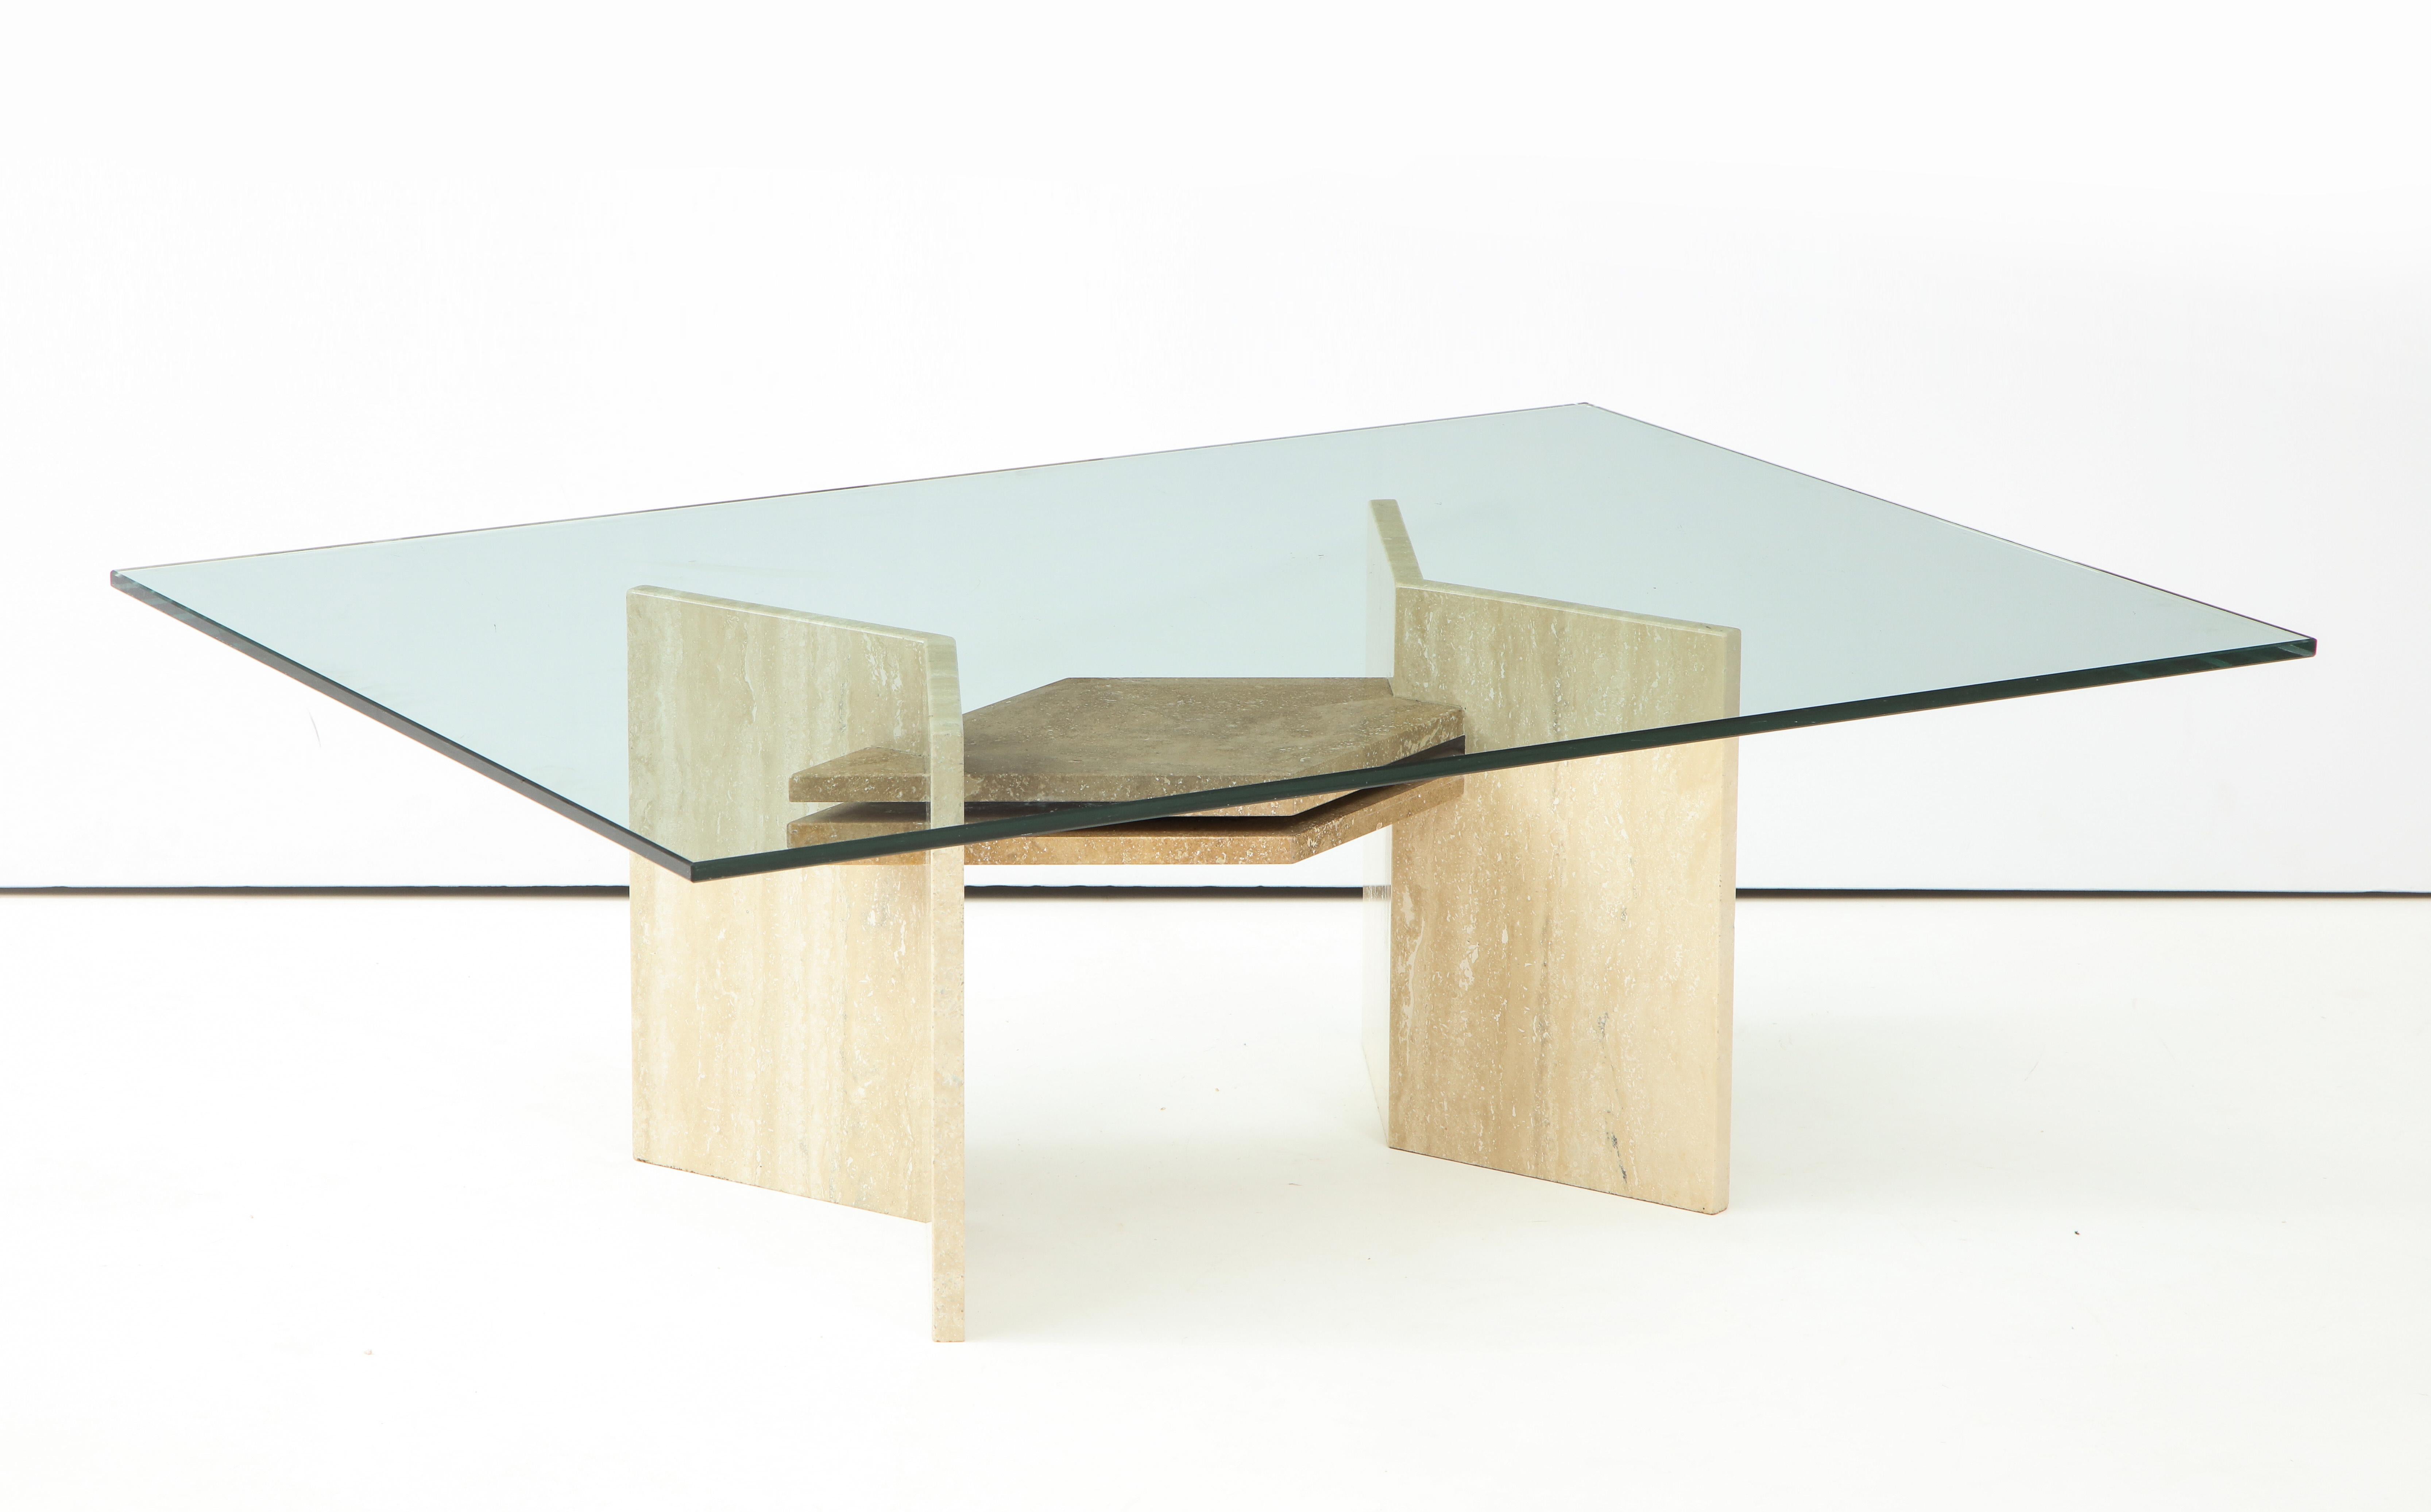 Geometric polished travertine cocktail / coffee table.
The travertine base dimensions are 23